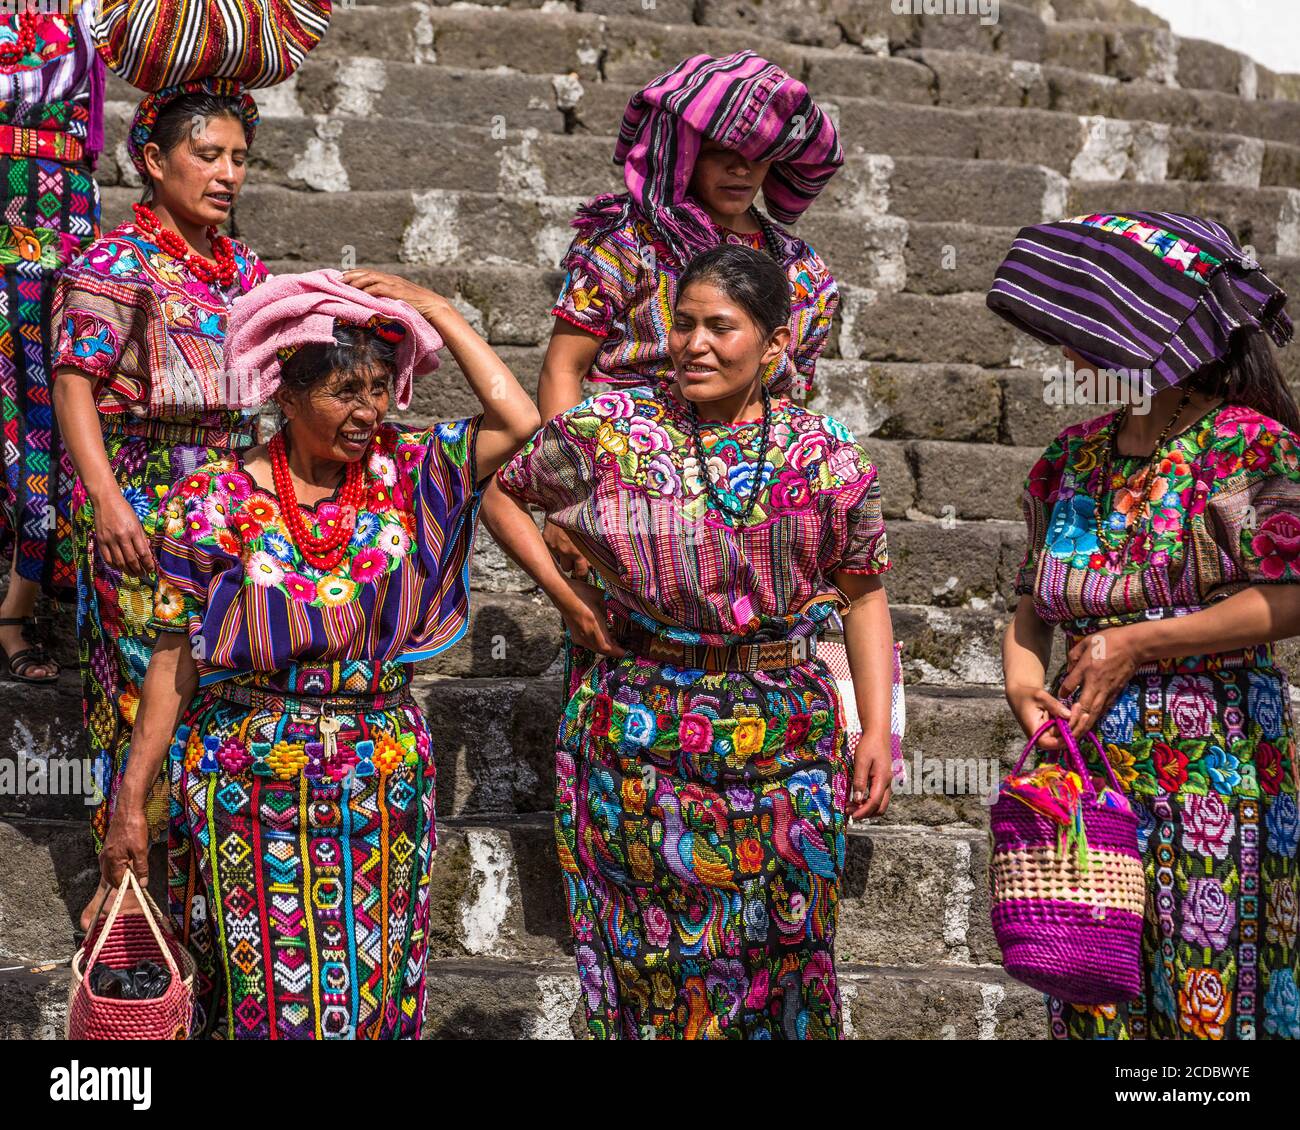 Mayan Indians in traditional dress leave the Church of Santiago after mass in Santiago Atitlan, Guatemala. Stock Photo